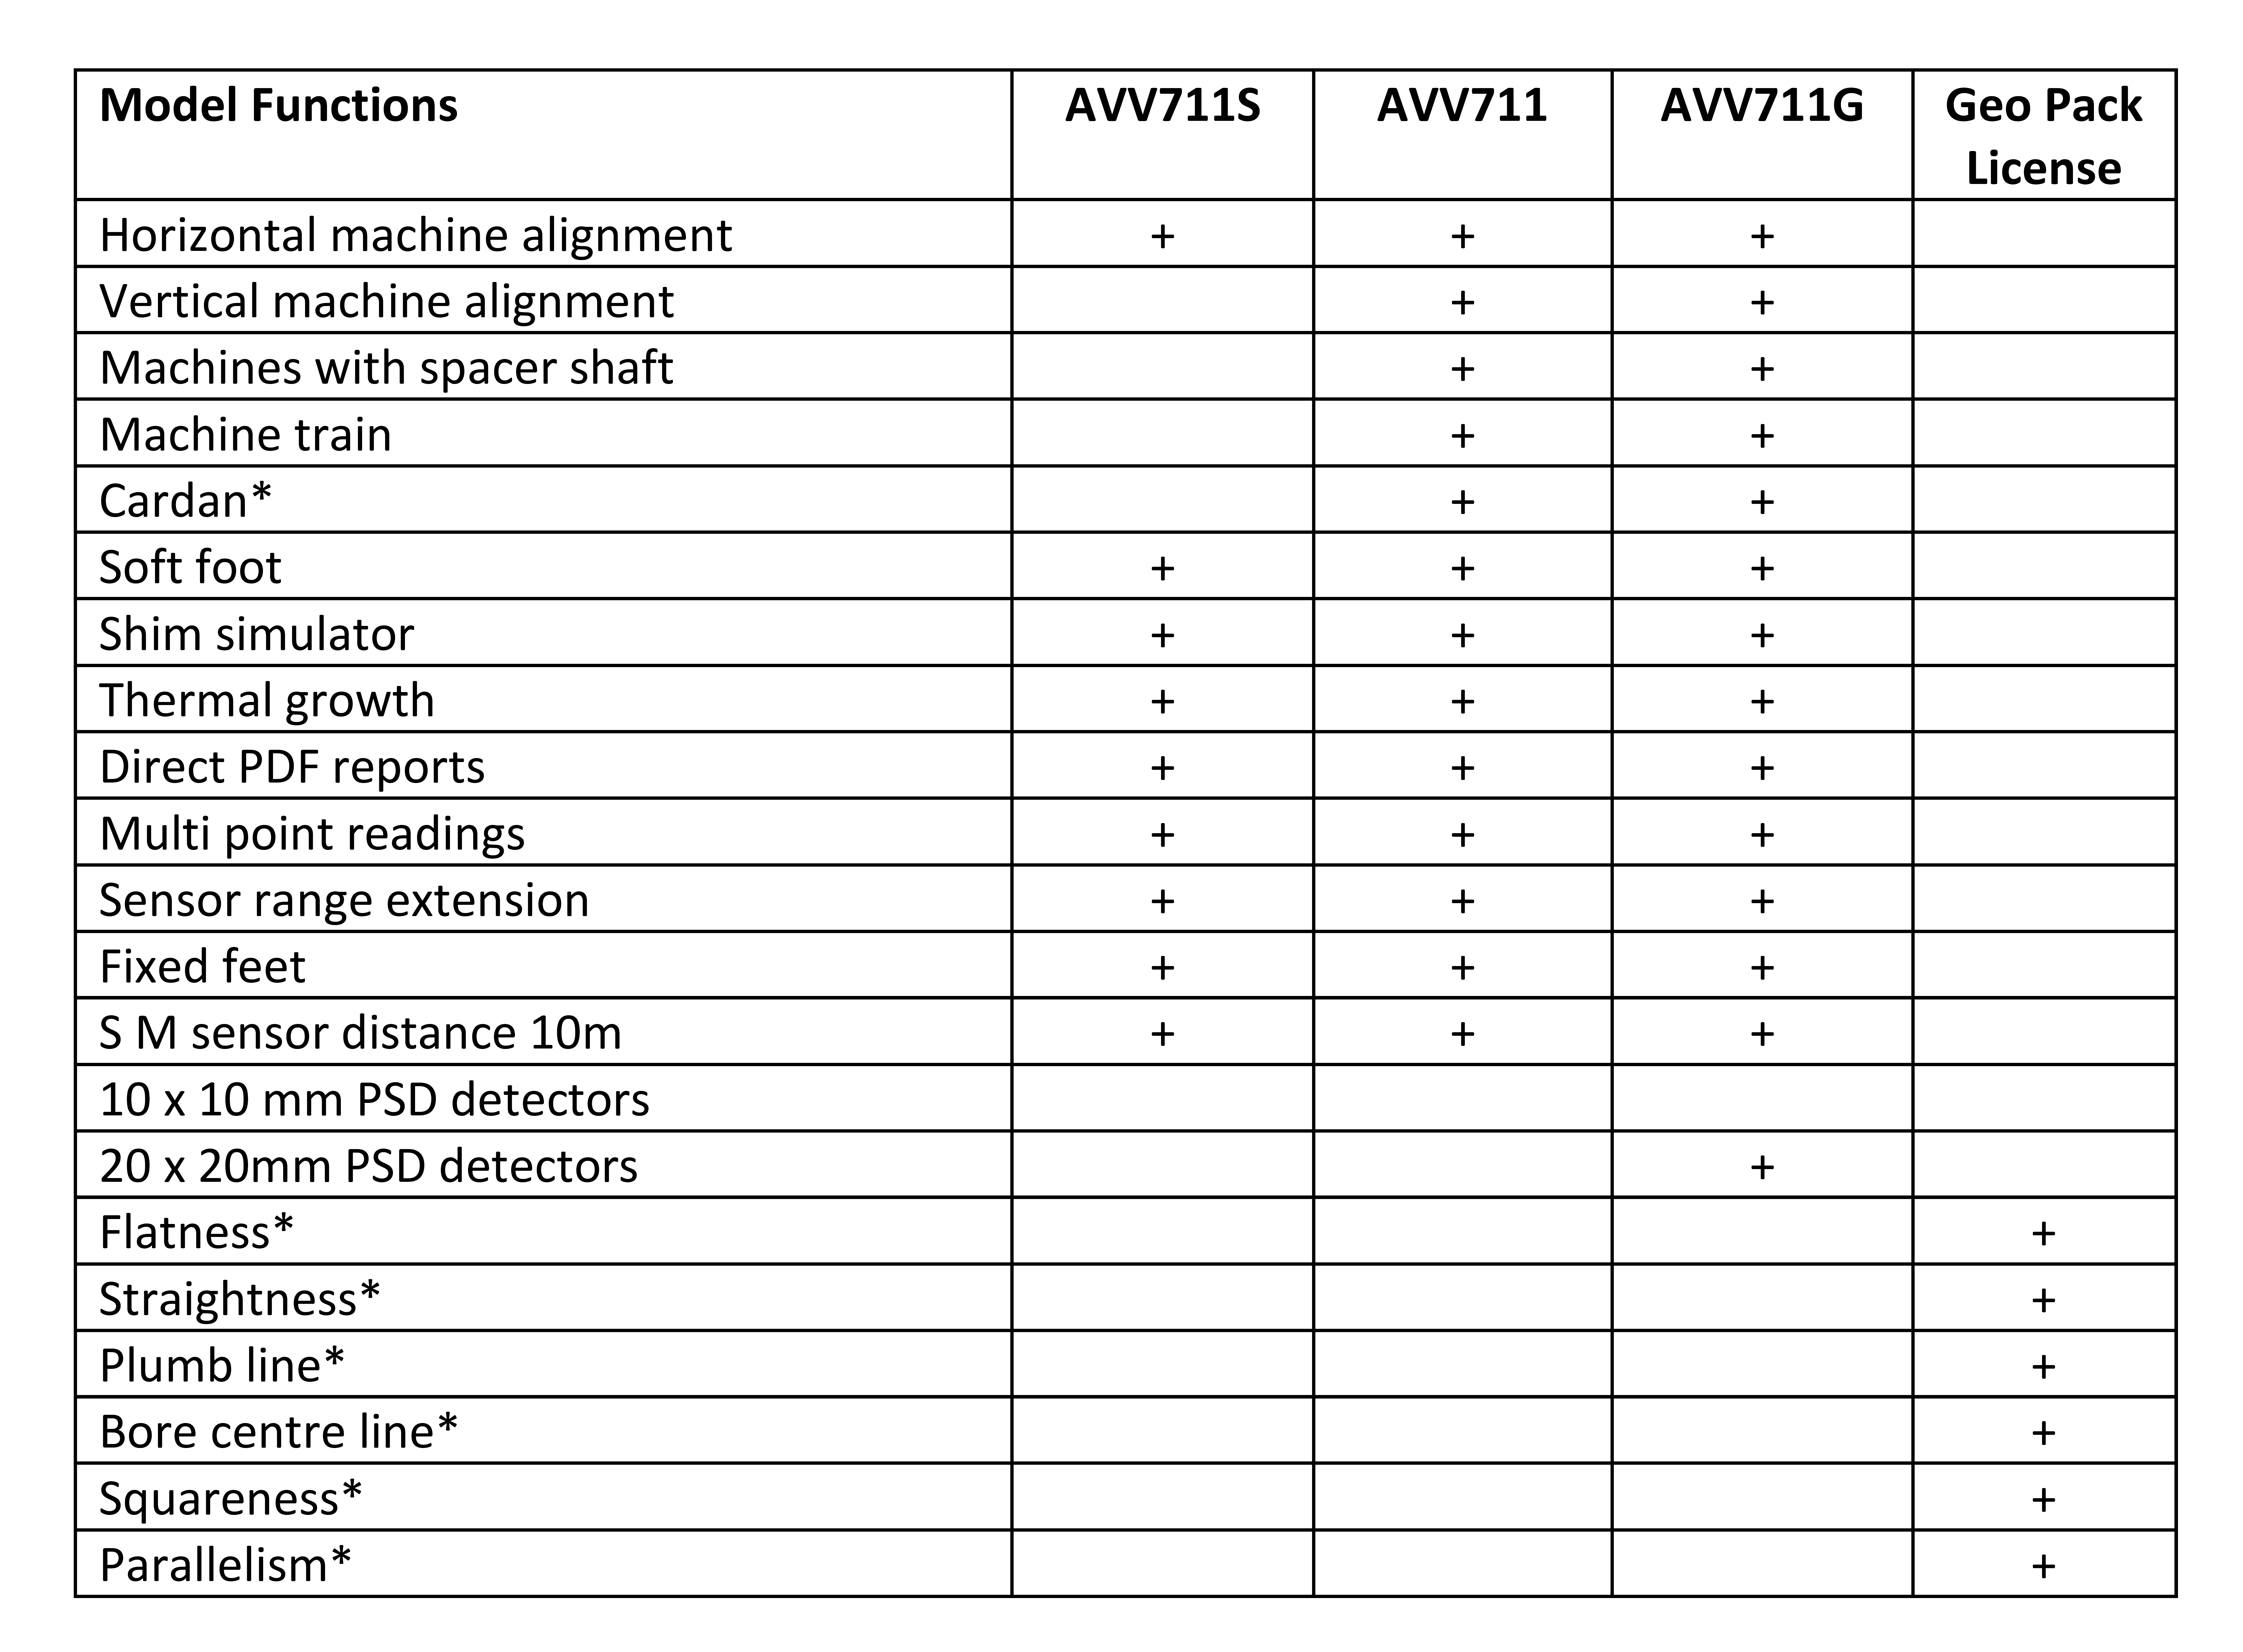 AVV711_table.png - 830.42 kB